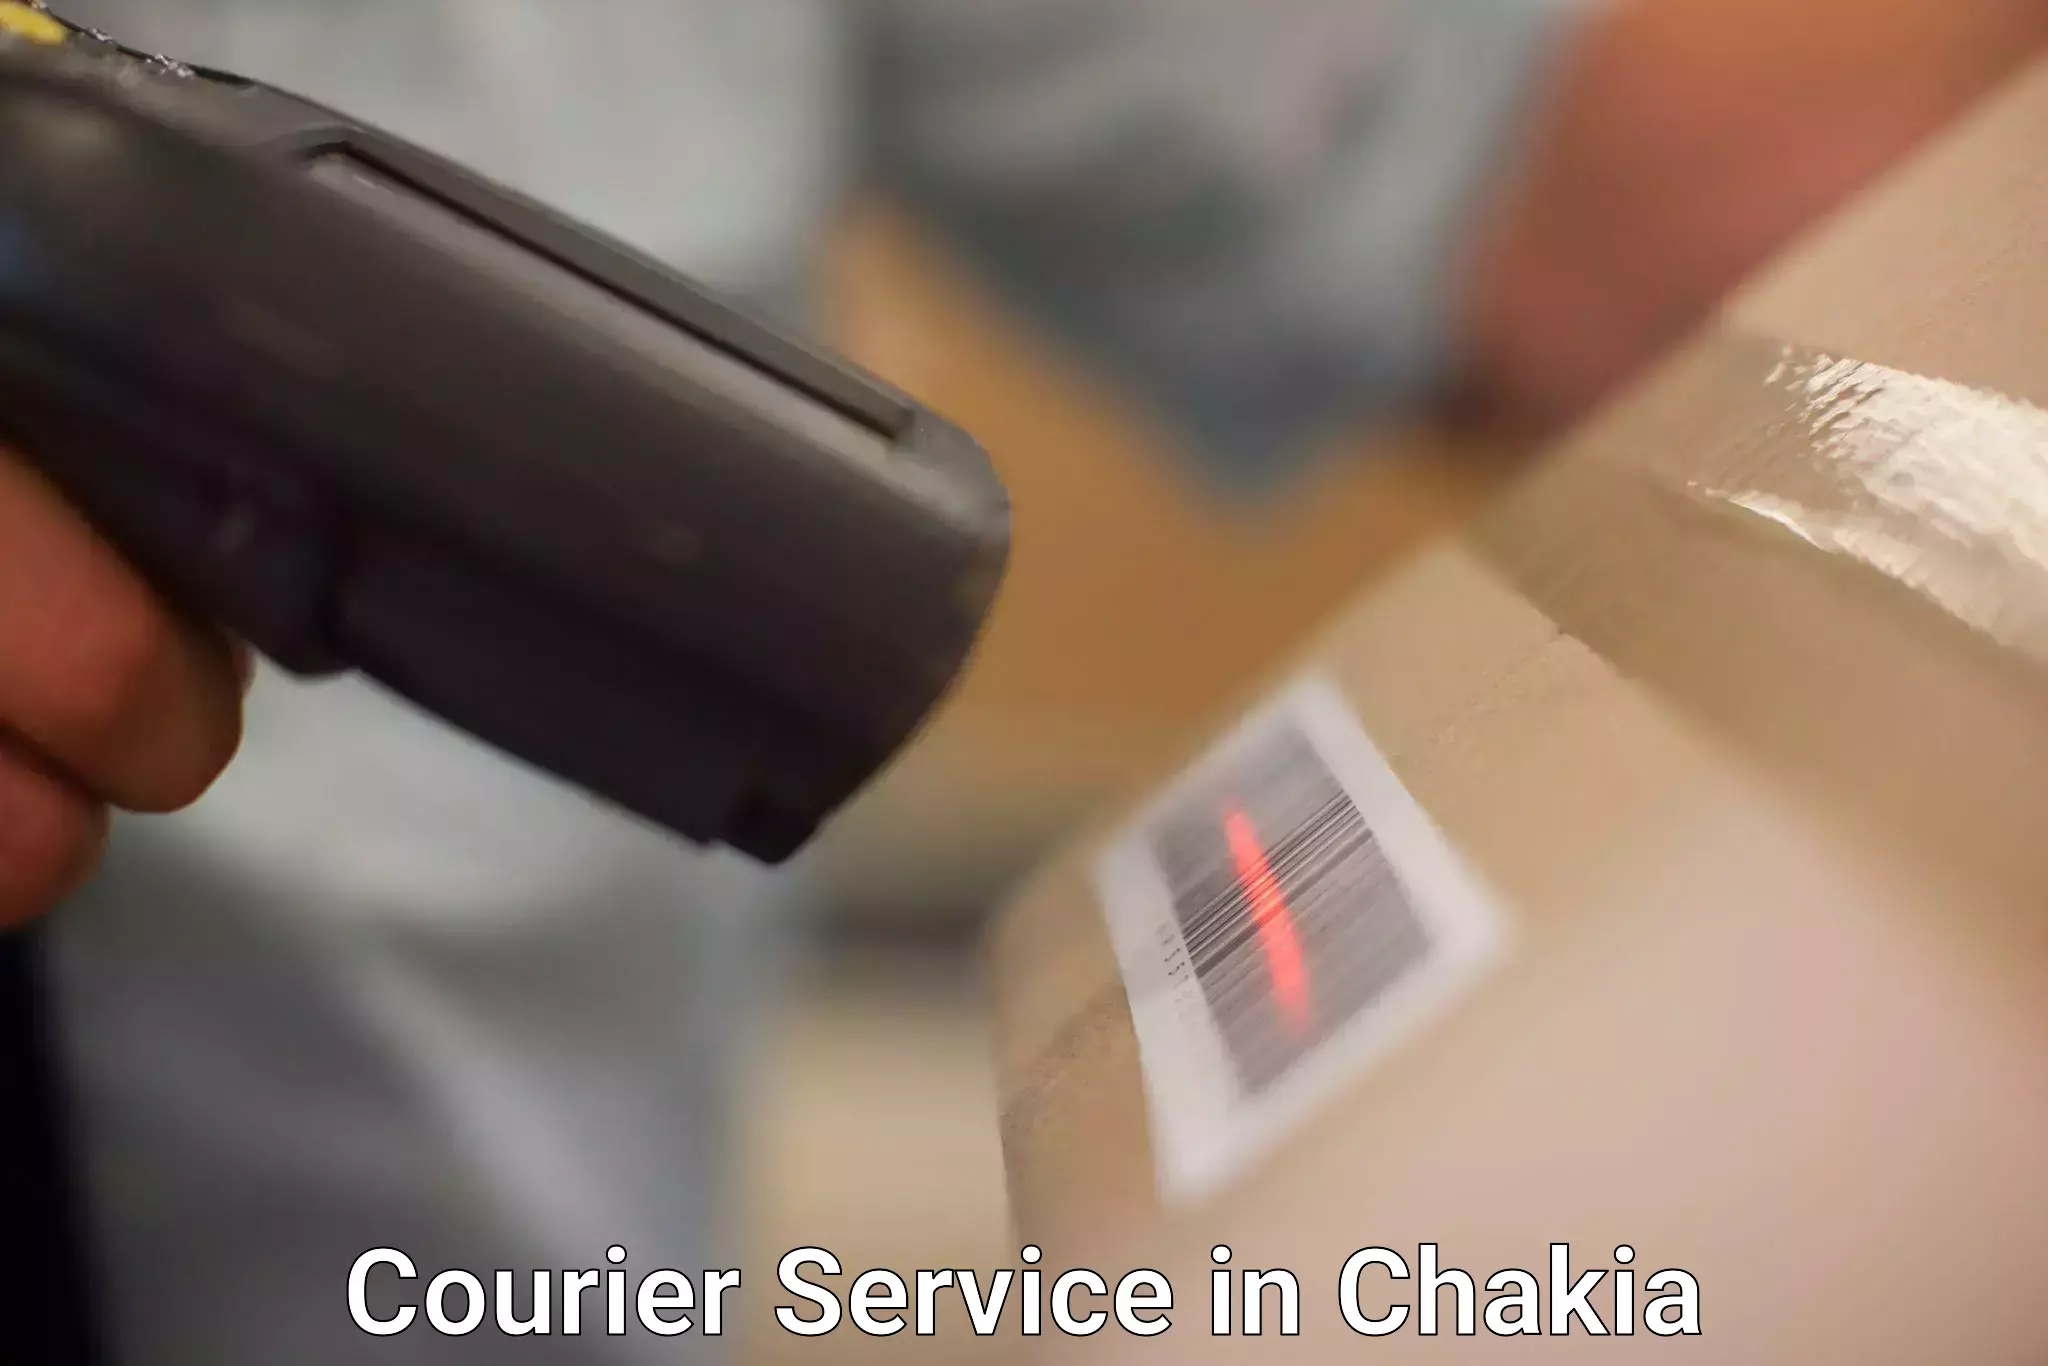 Modern delivery technologies in Chakia